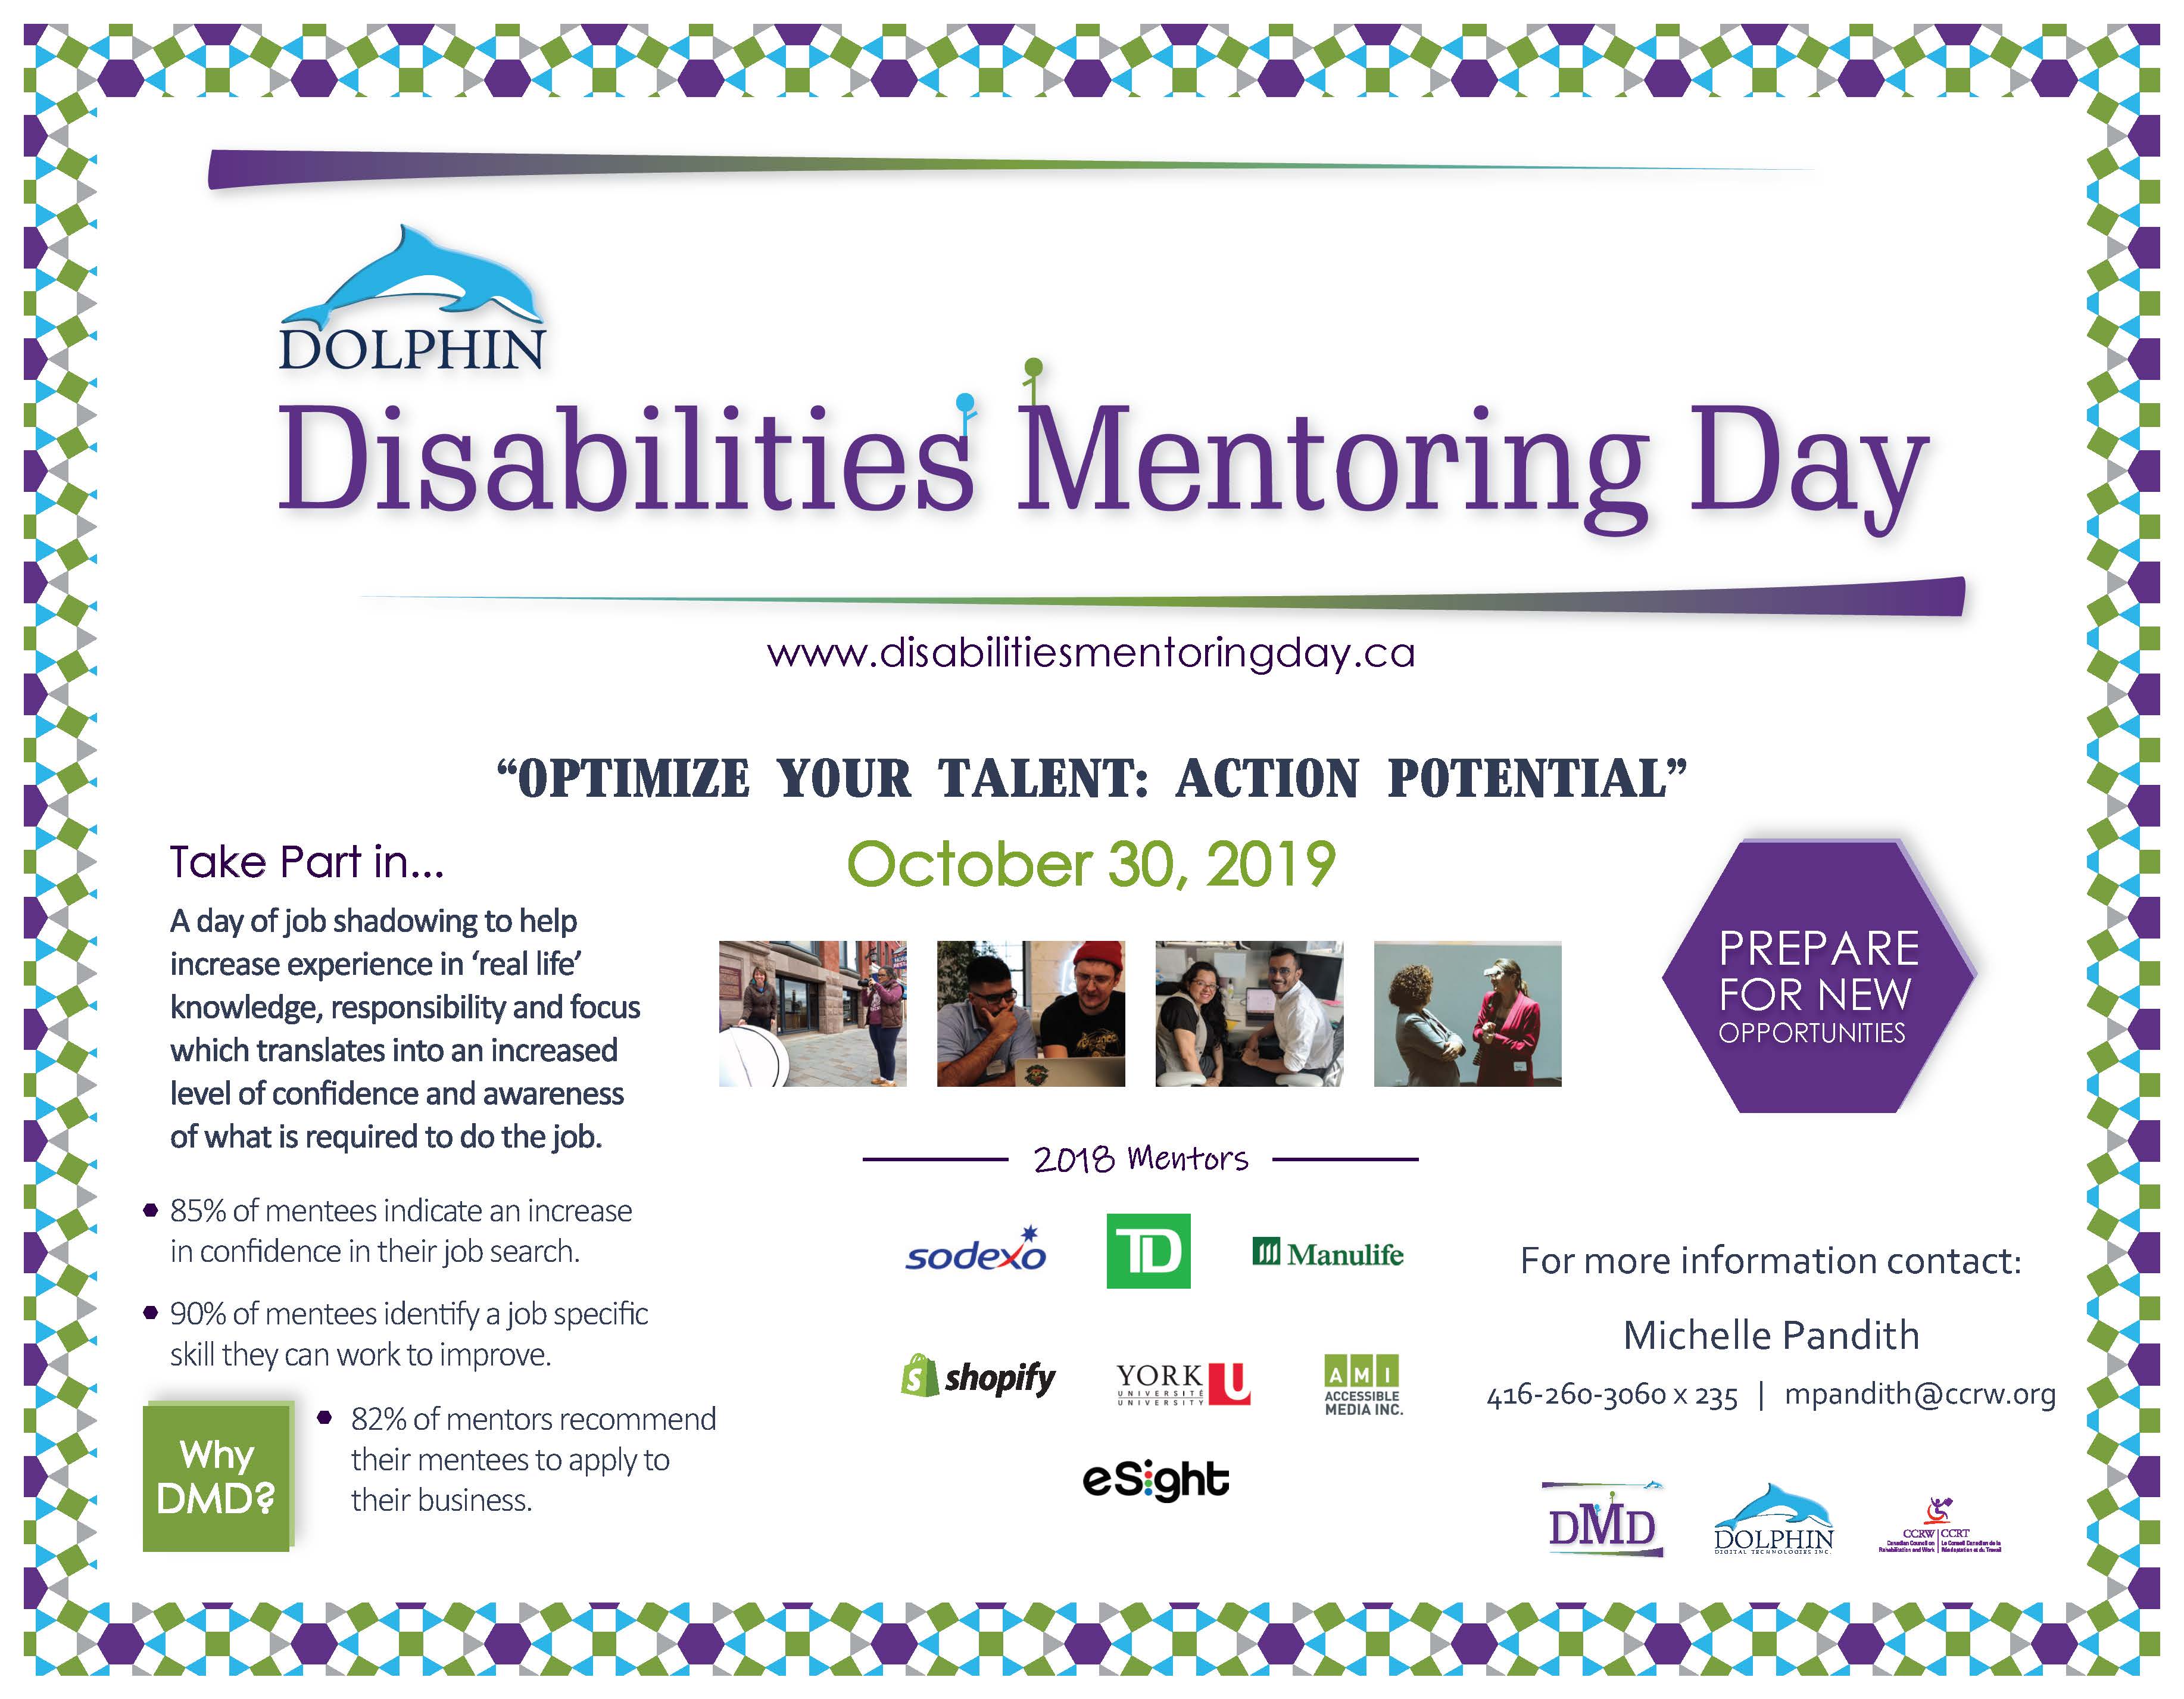 Dolphin Disabilities Mentoring Day Flyer - October 30, 2019